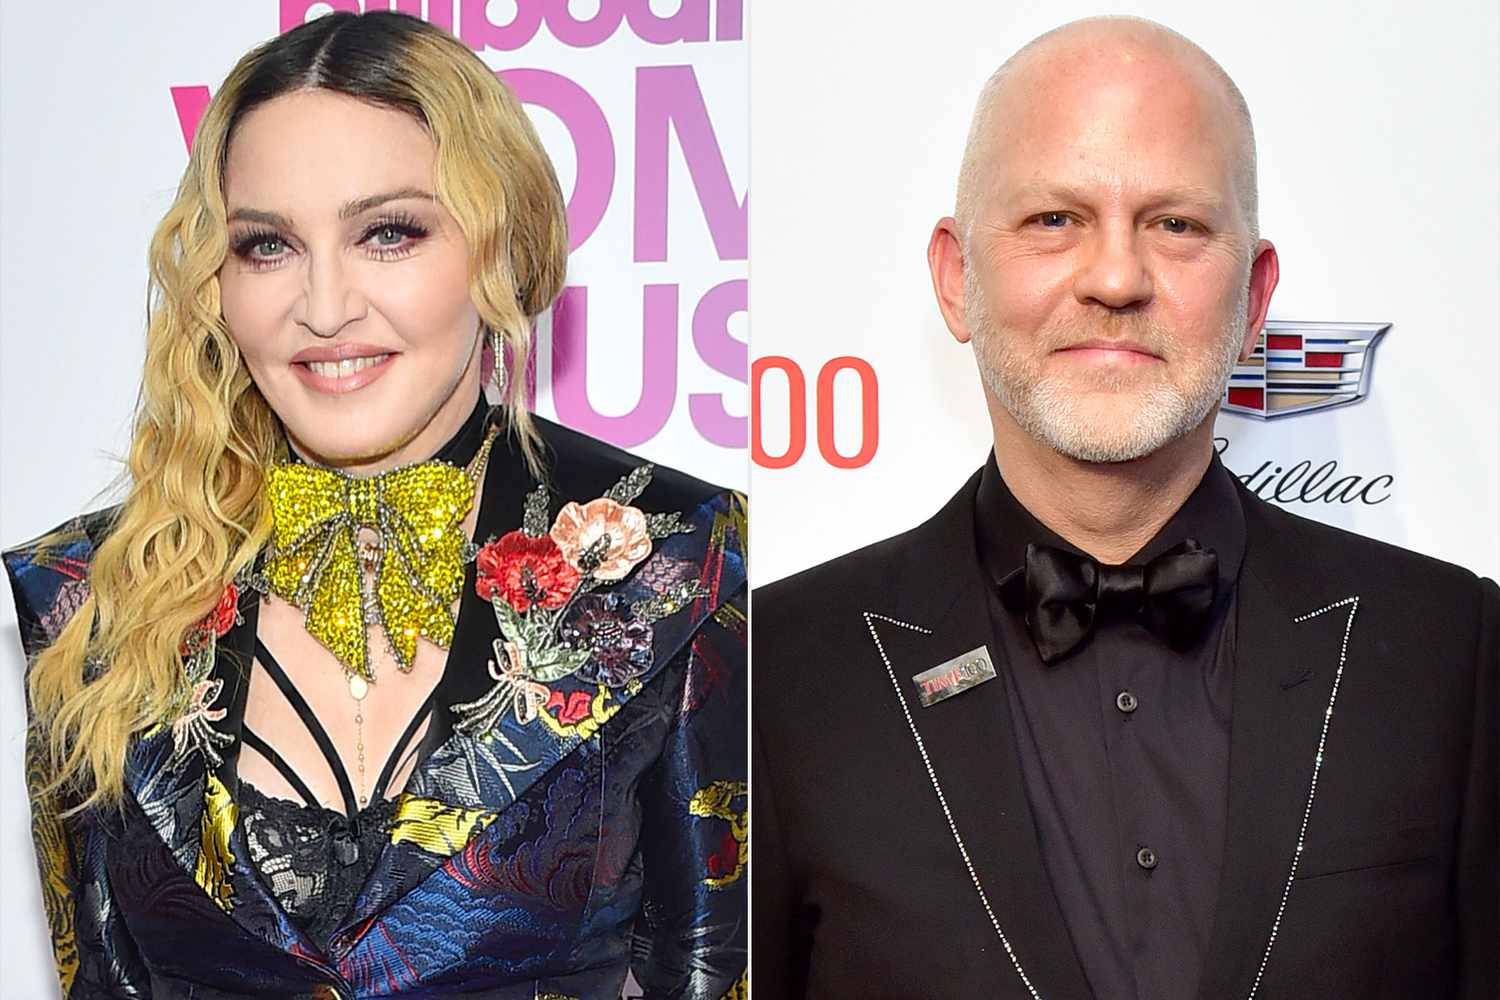 Madonna attends the Billboard Women in Music 2016 event on December 9, 2016 in New York City. ; Ryan Murphy attends the Time 100 Gala 2019 at Jazz at Lincoln Center on April 23, 2019 in New York City.